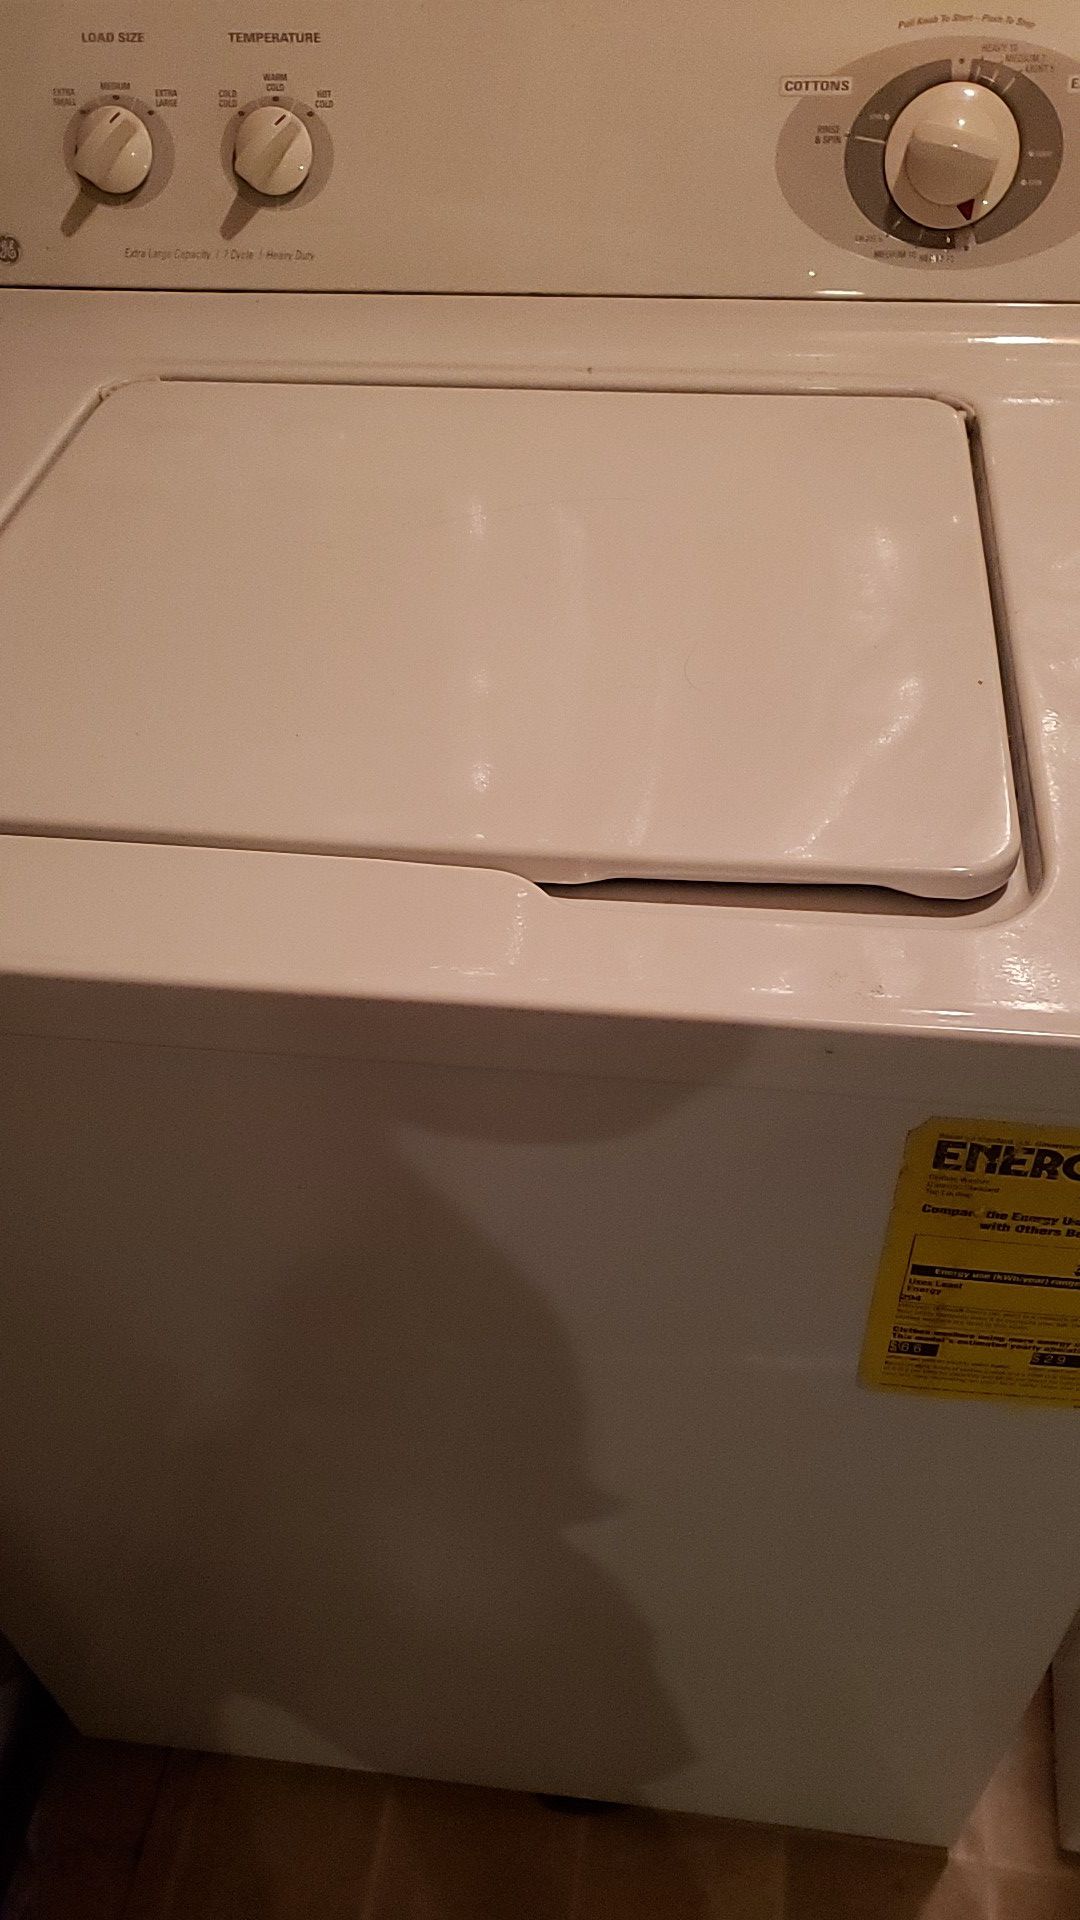 Washer for sale GE general electric